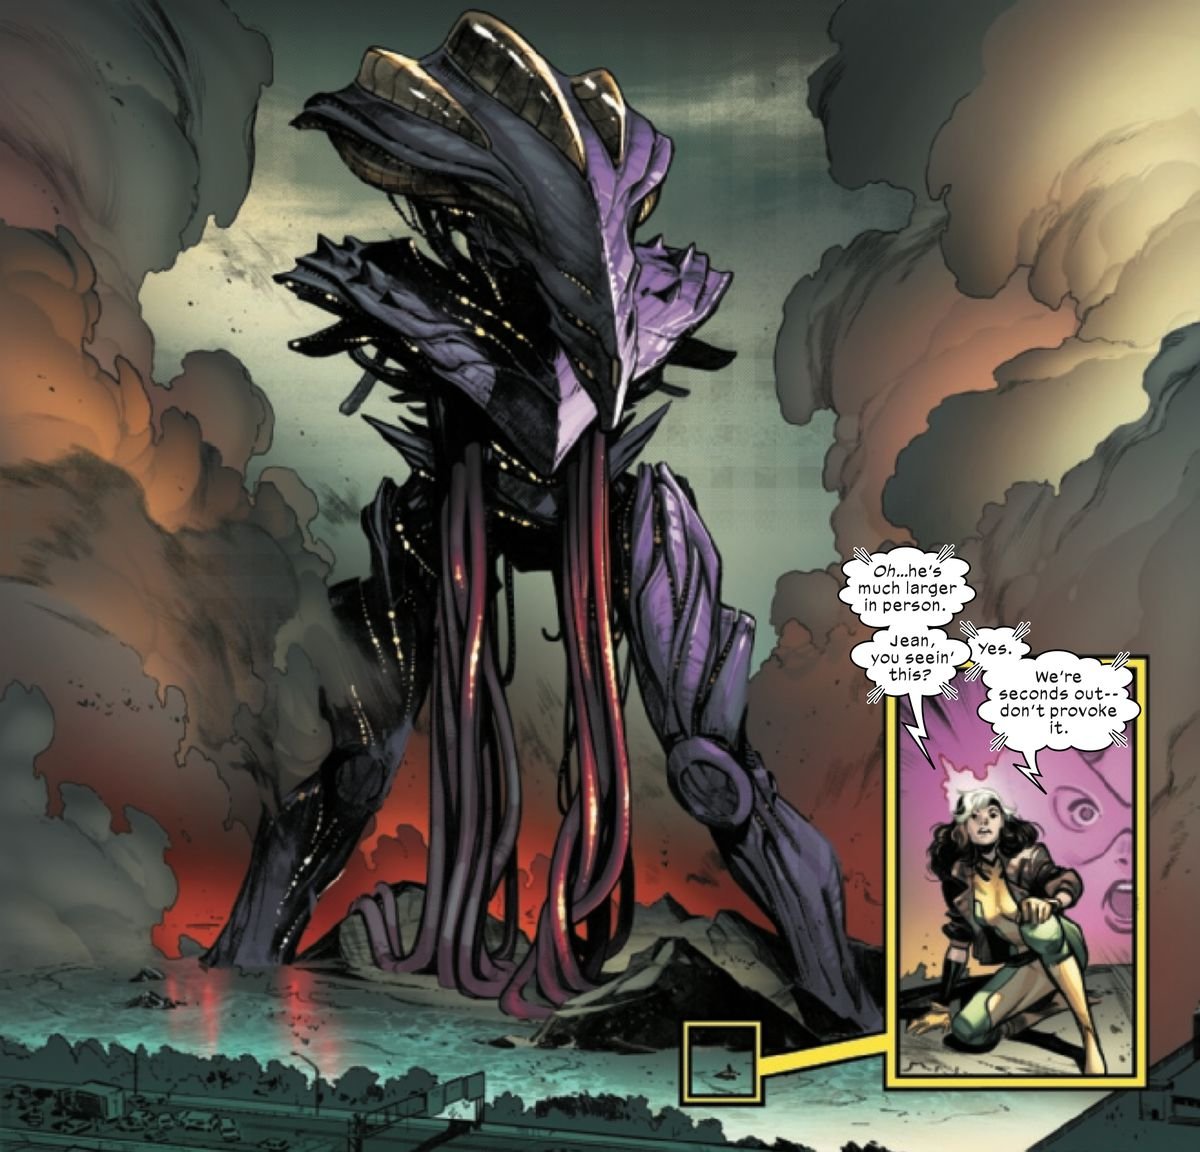 Rogue is a tiny figure, magnified in an inset panel, in front a huge, armored and tentacled monster that towers over a New York highway in X-Men #1 (2021). 